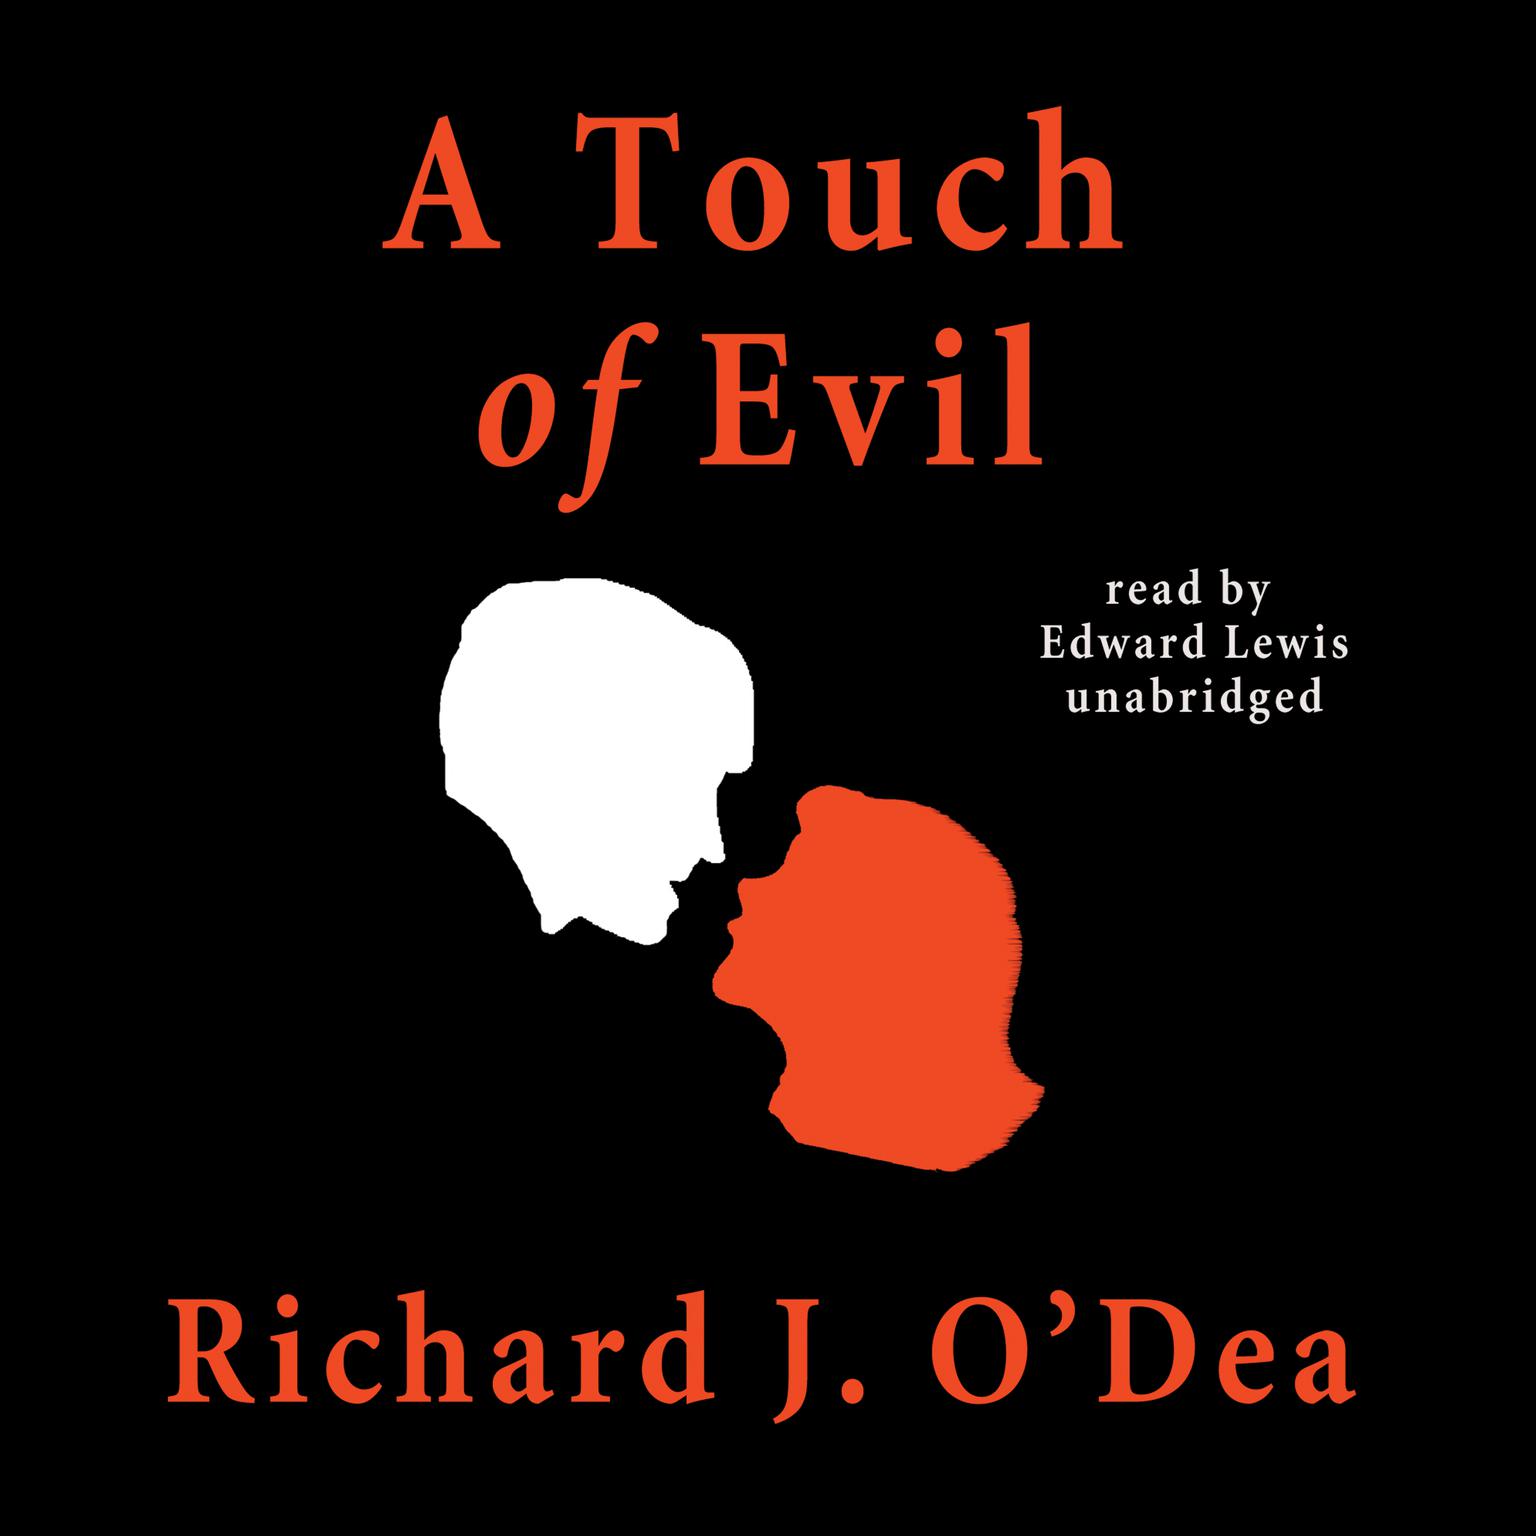 A Touch of Evil Audiobook, by Richard J. O’Dea